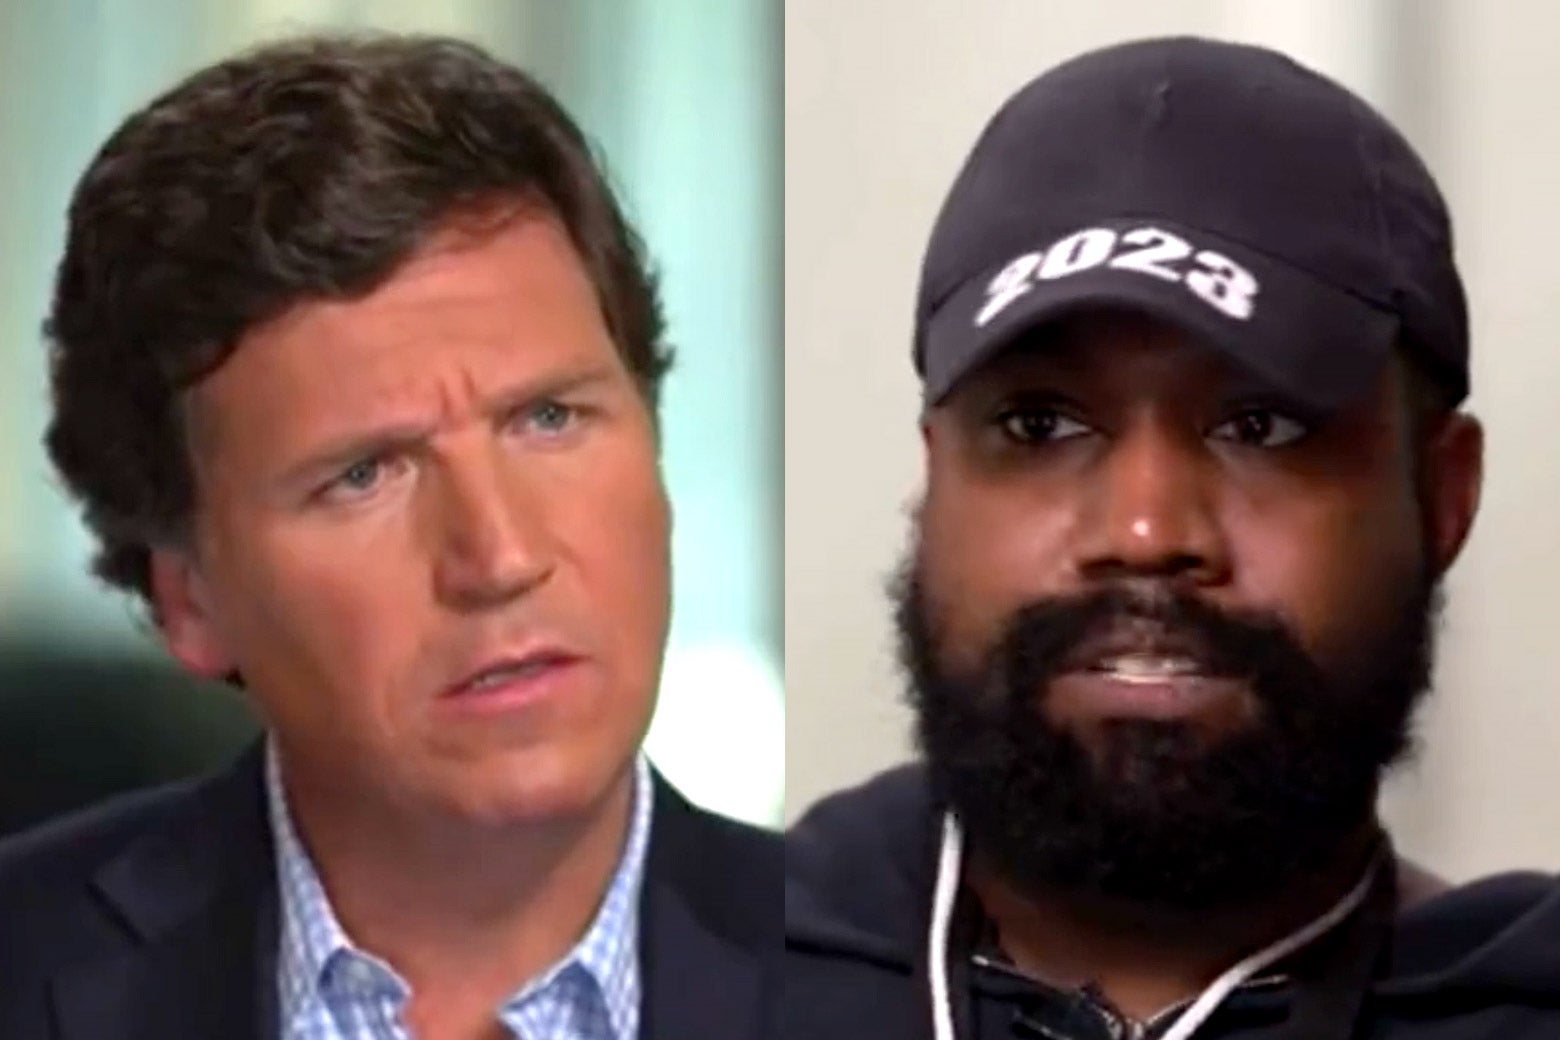 A side-by-side of Tucker Carlson and Ye (Kanye West) during an interview on October 6, 2022.